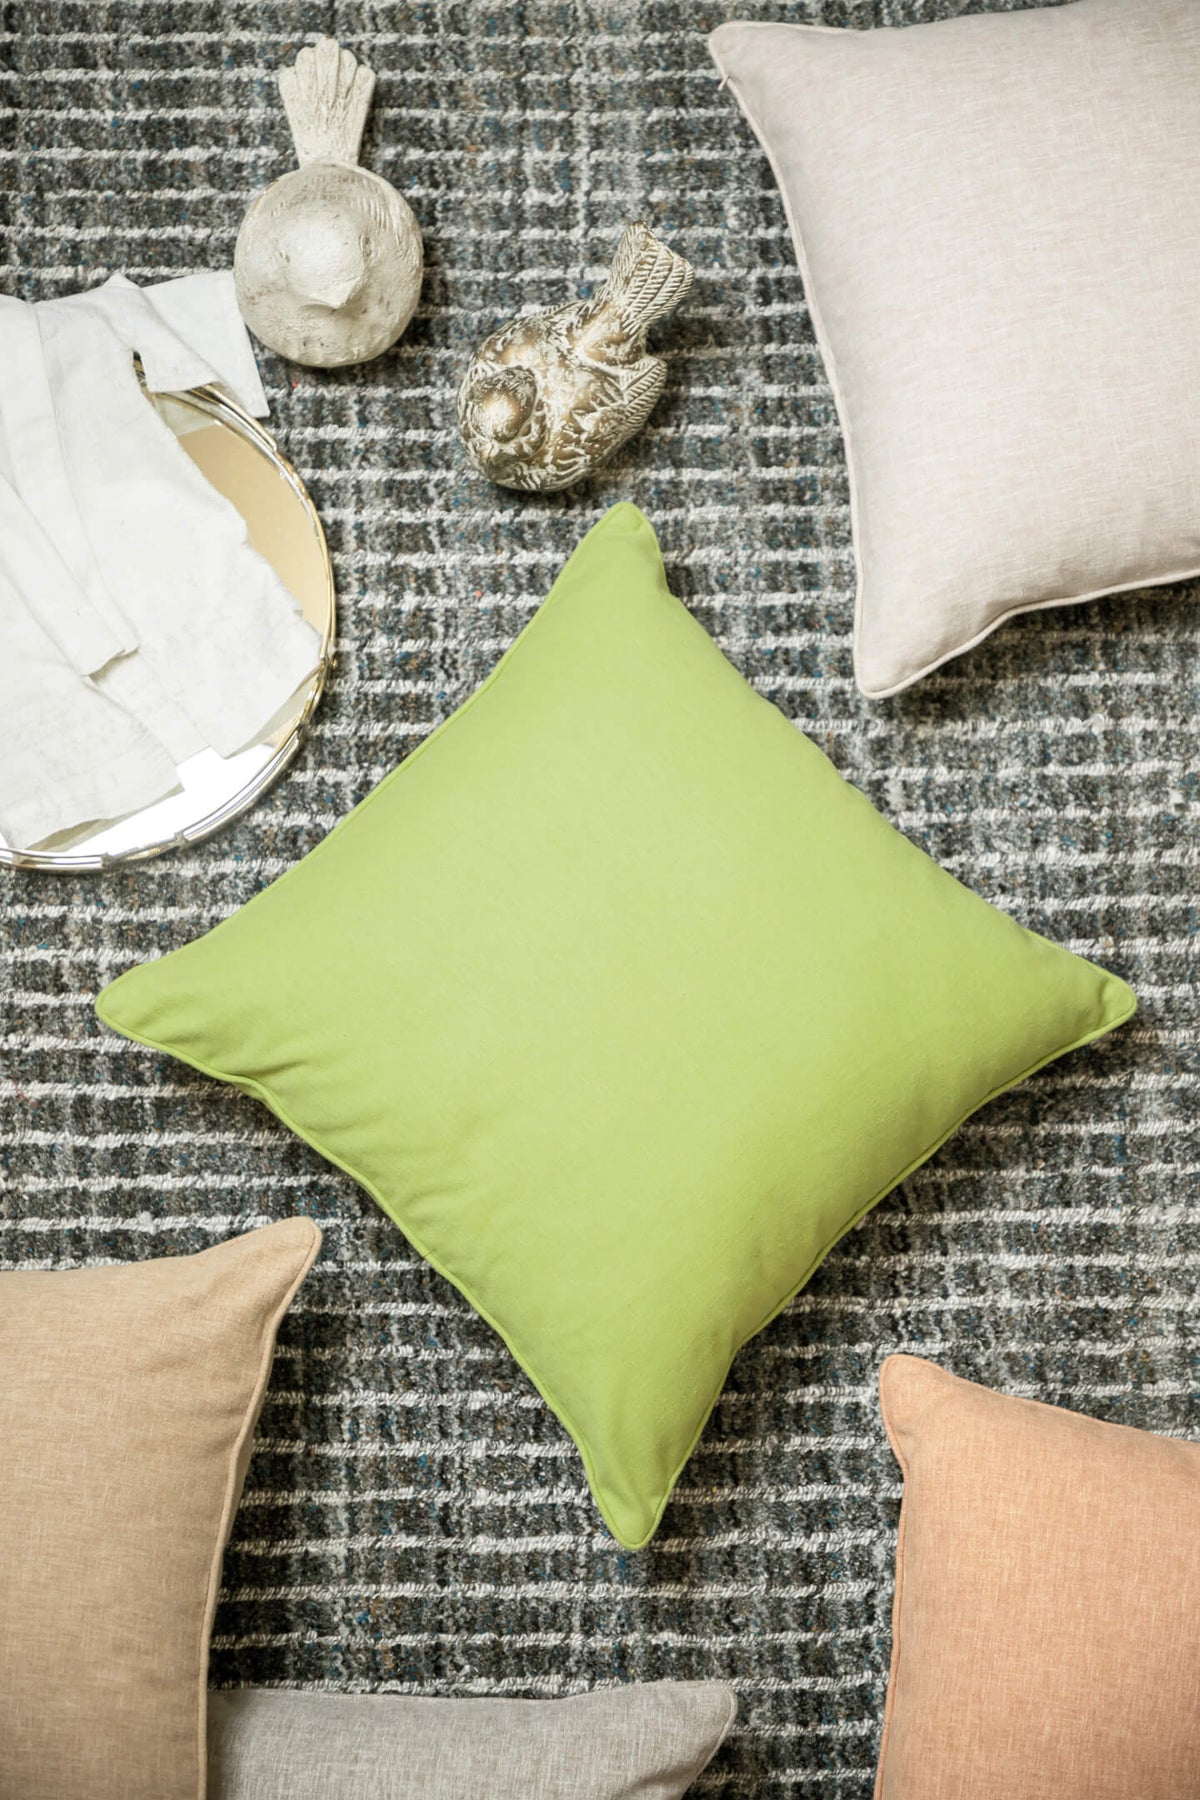 Green Cushion Covers Online